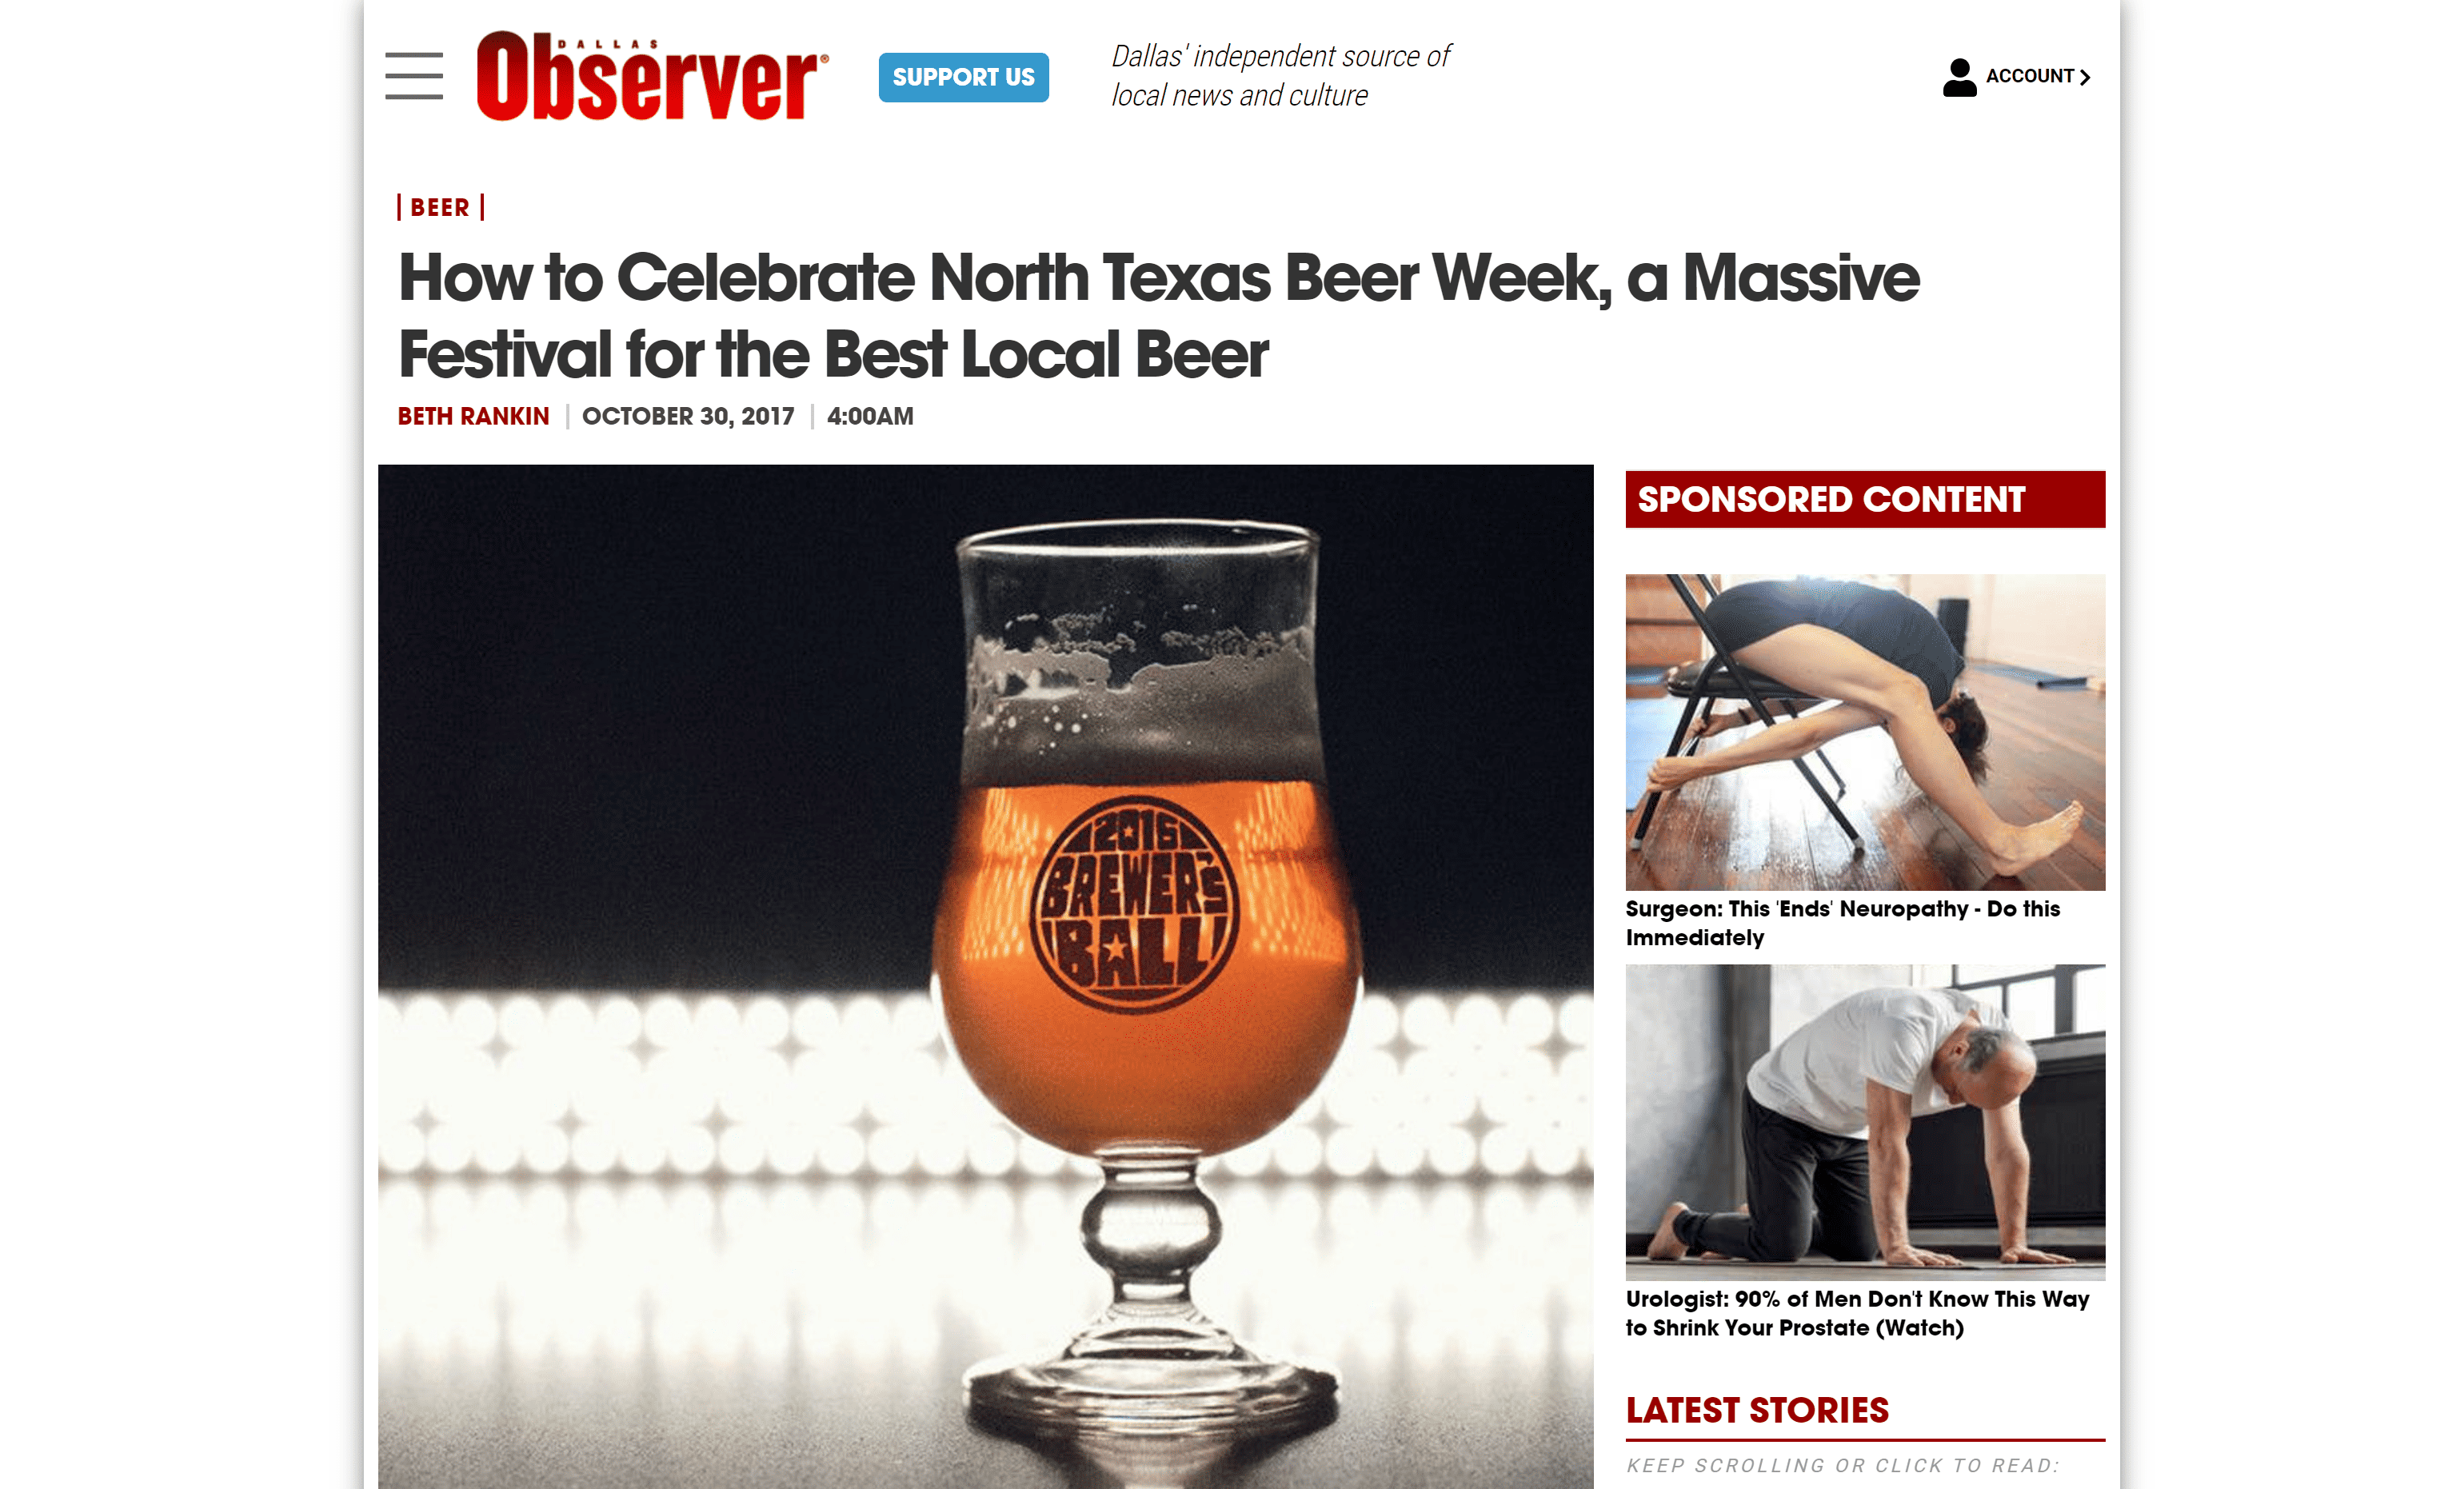 NTX Beer Week 2017 events covered in Dallas Observer